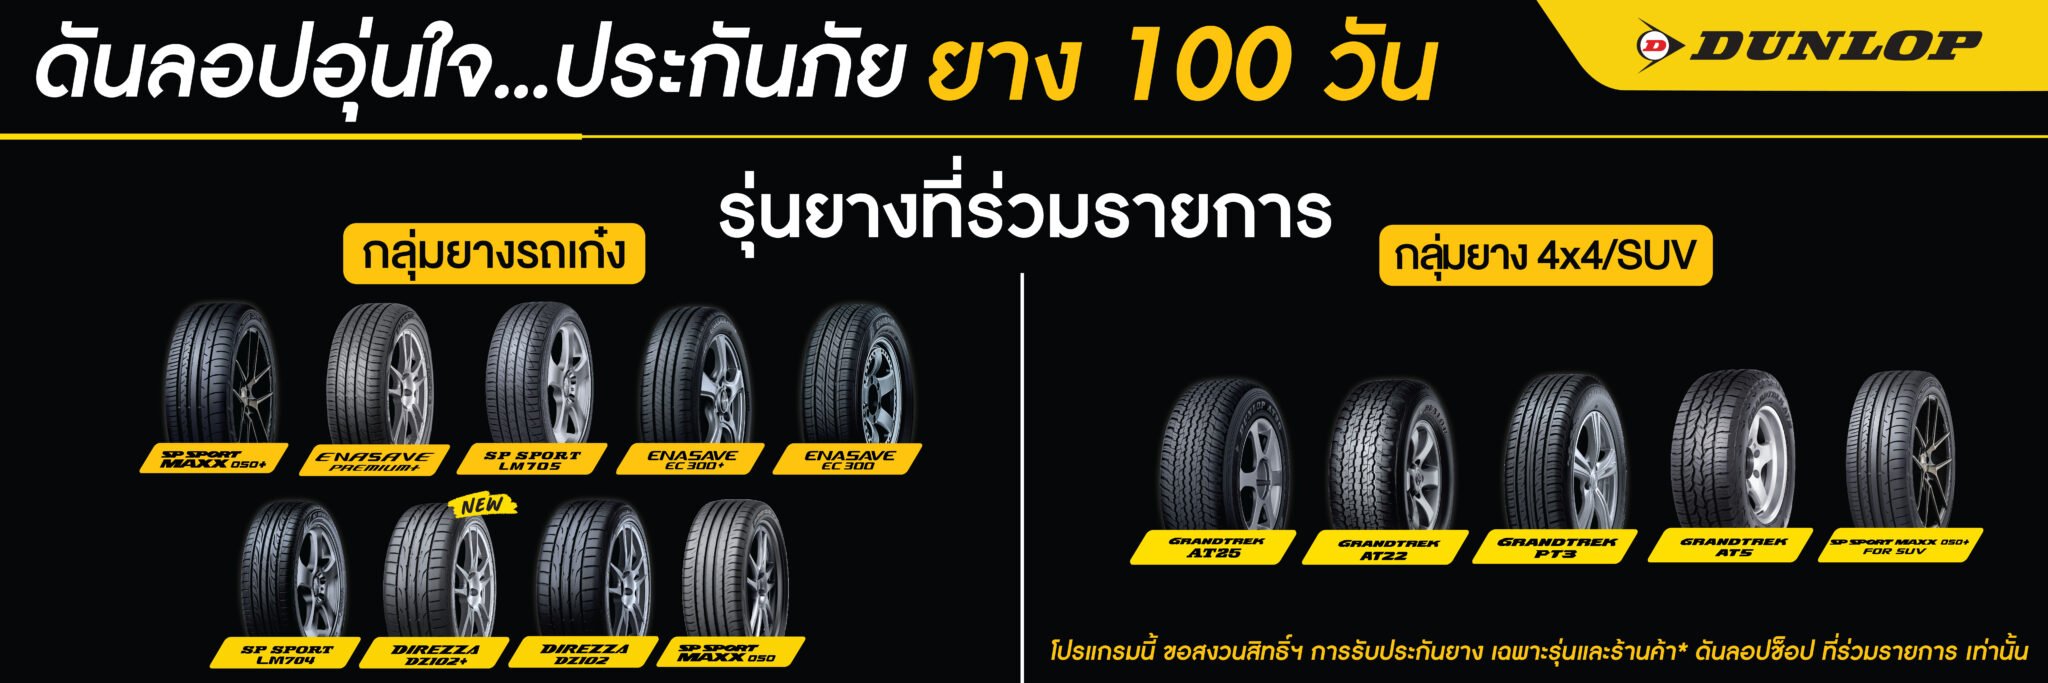 warranty-dunlop-tire-thailand-company-limited